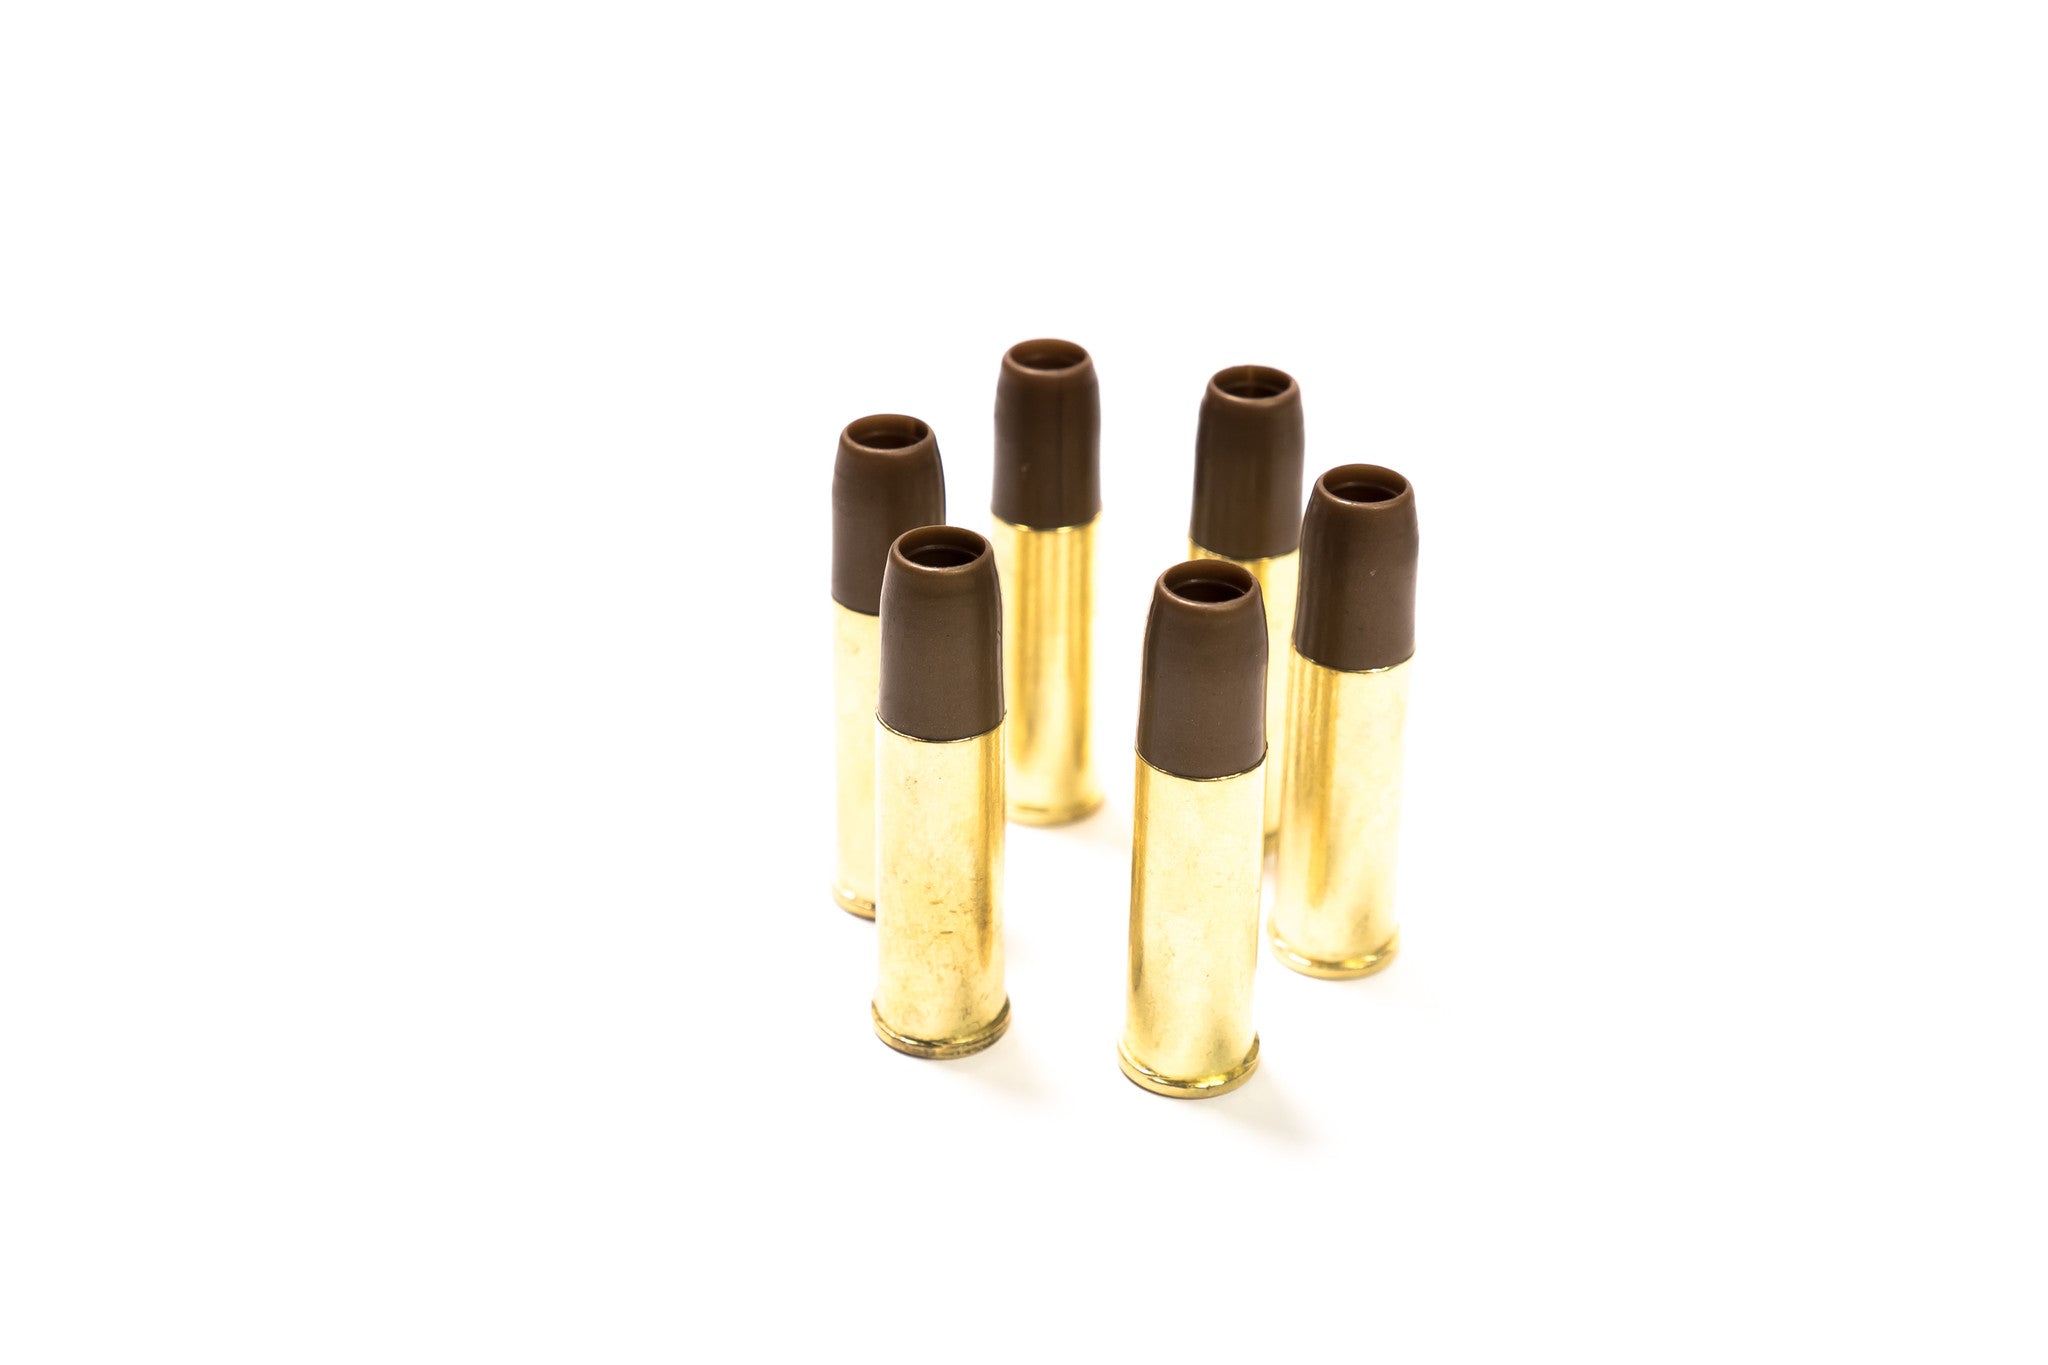 Black Ops Exterminator Airsoft BB Revolver Cartridges - Pack of 6 Shel -  Black Ops USA